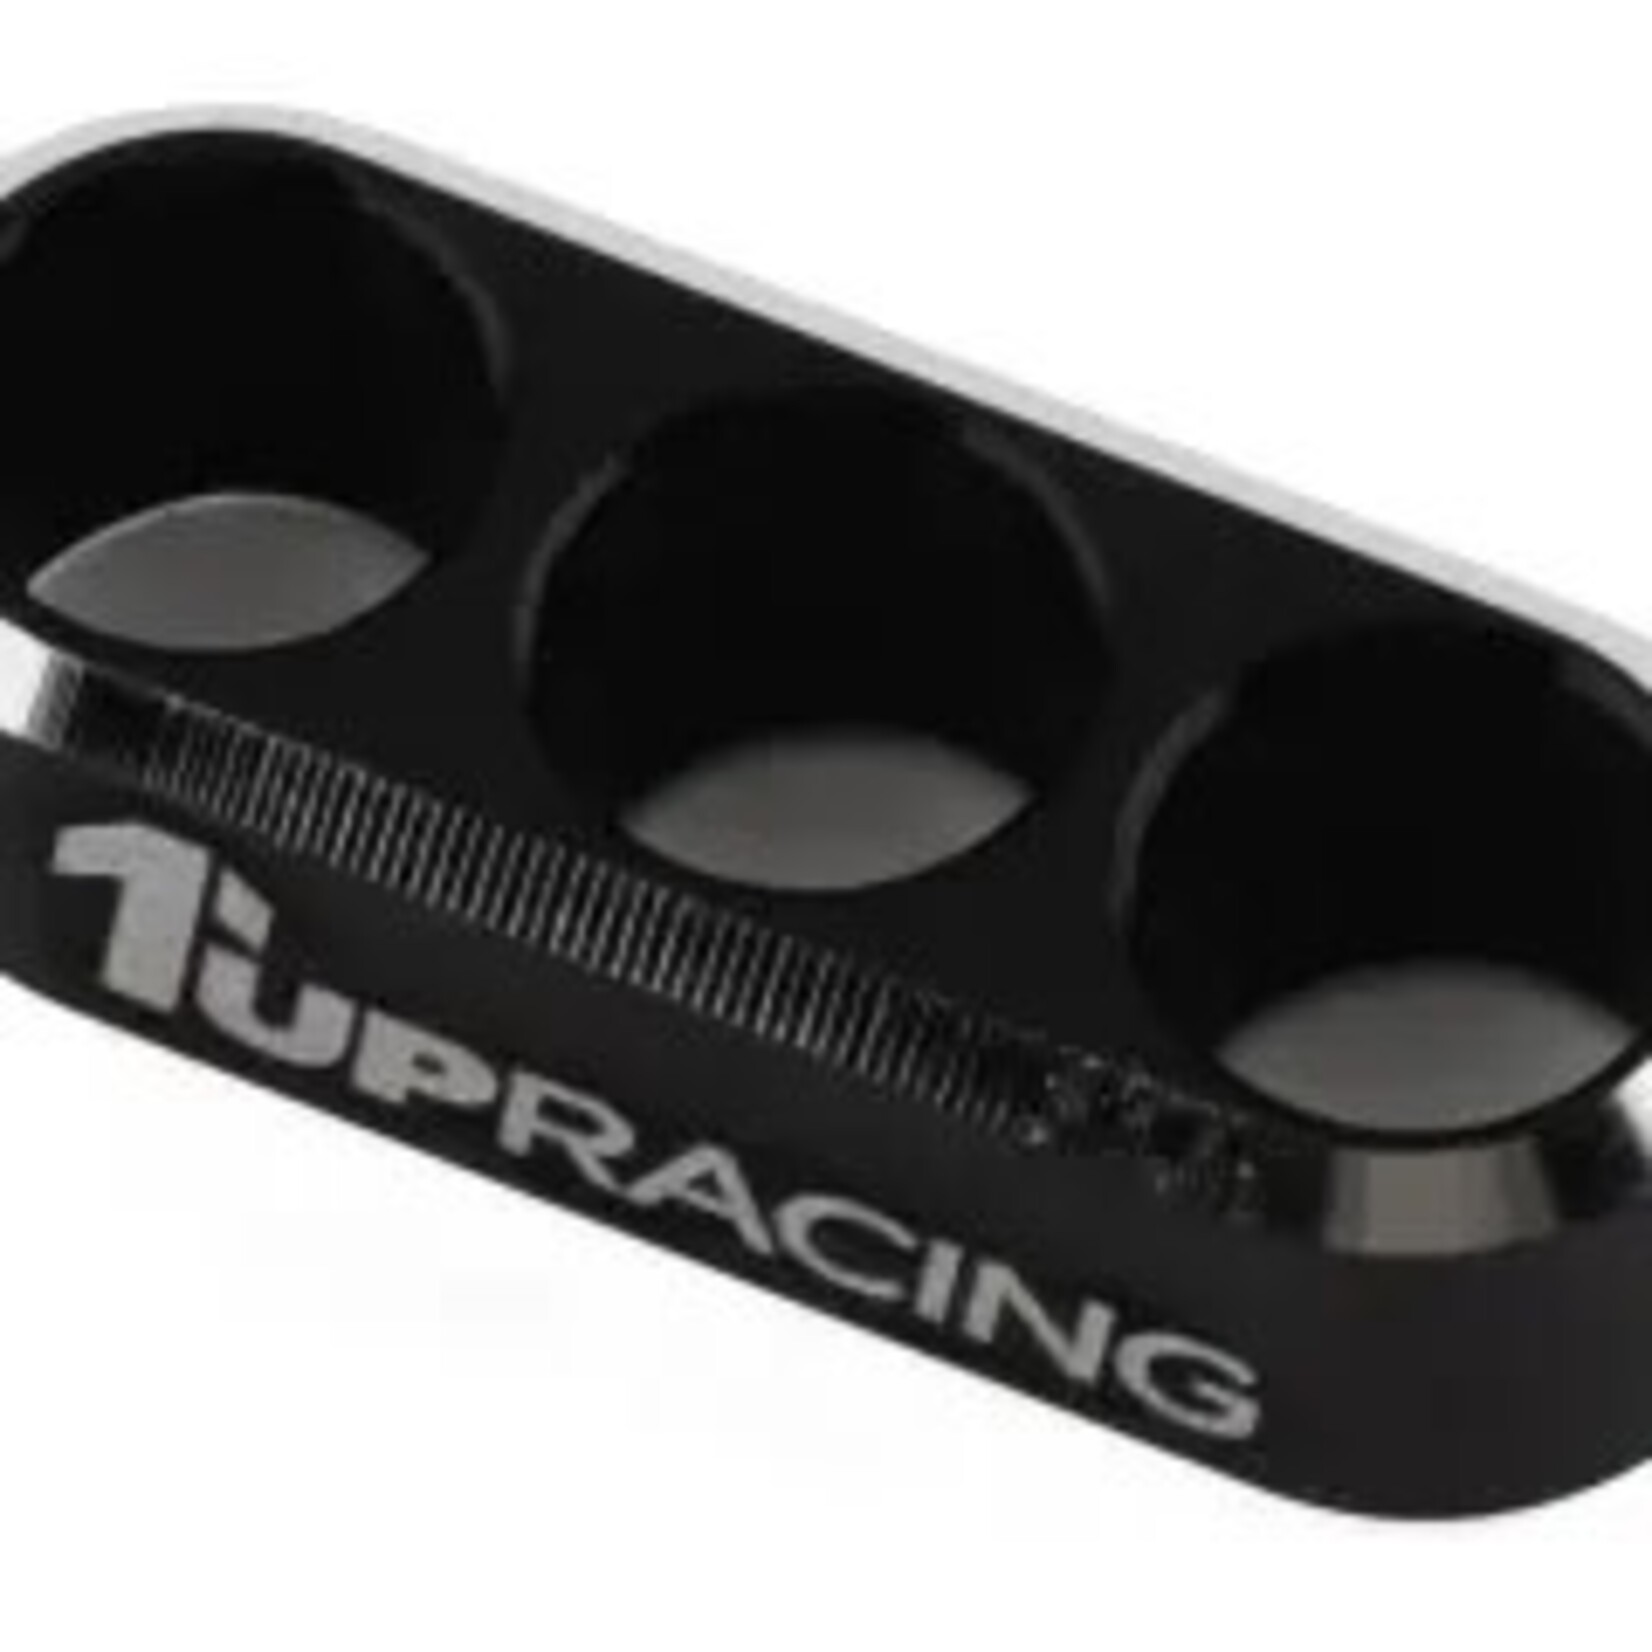 1UP 1UP190612 1Up Racing UltraLite Wire Organizer - 3 x 4.1mm (Fits most 12-14g wire)